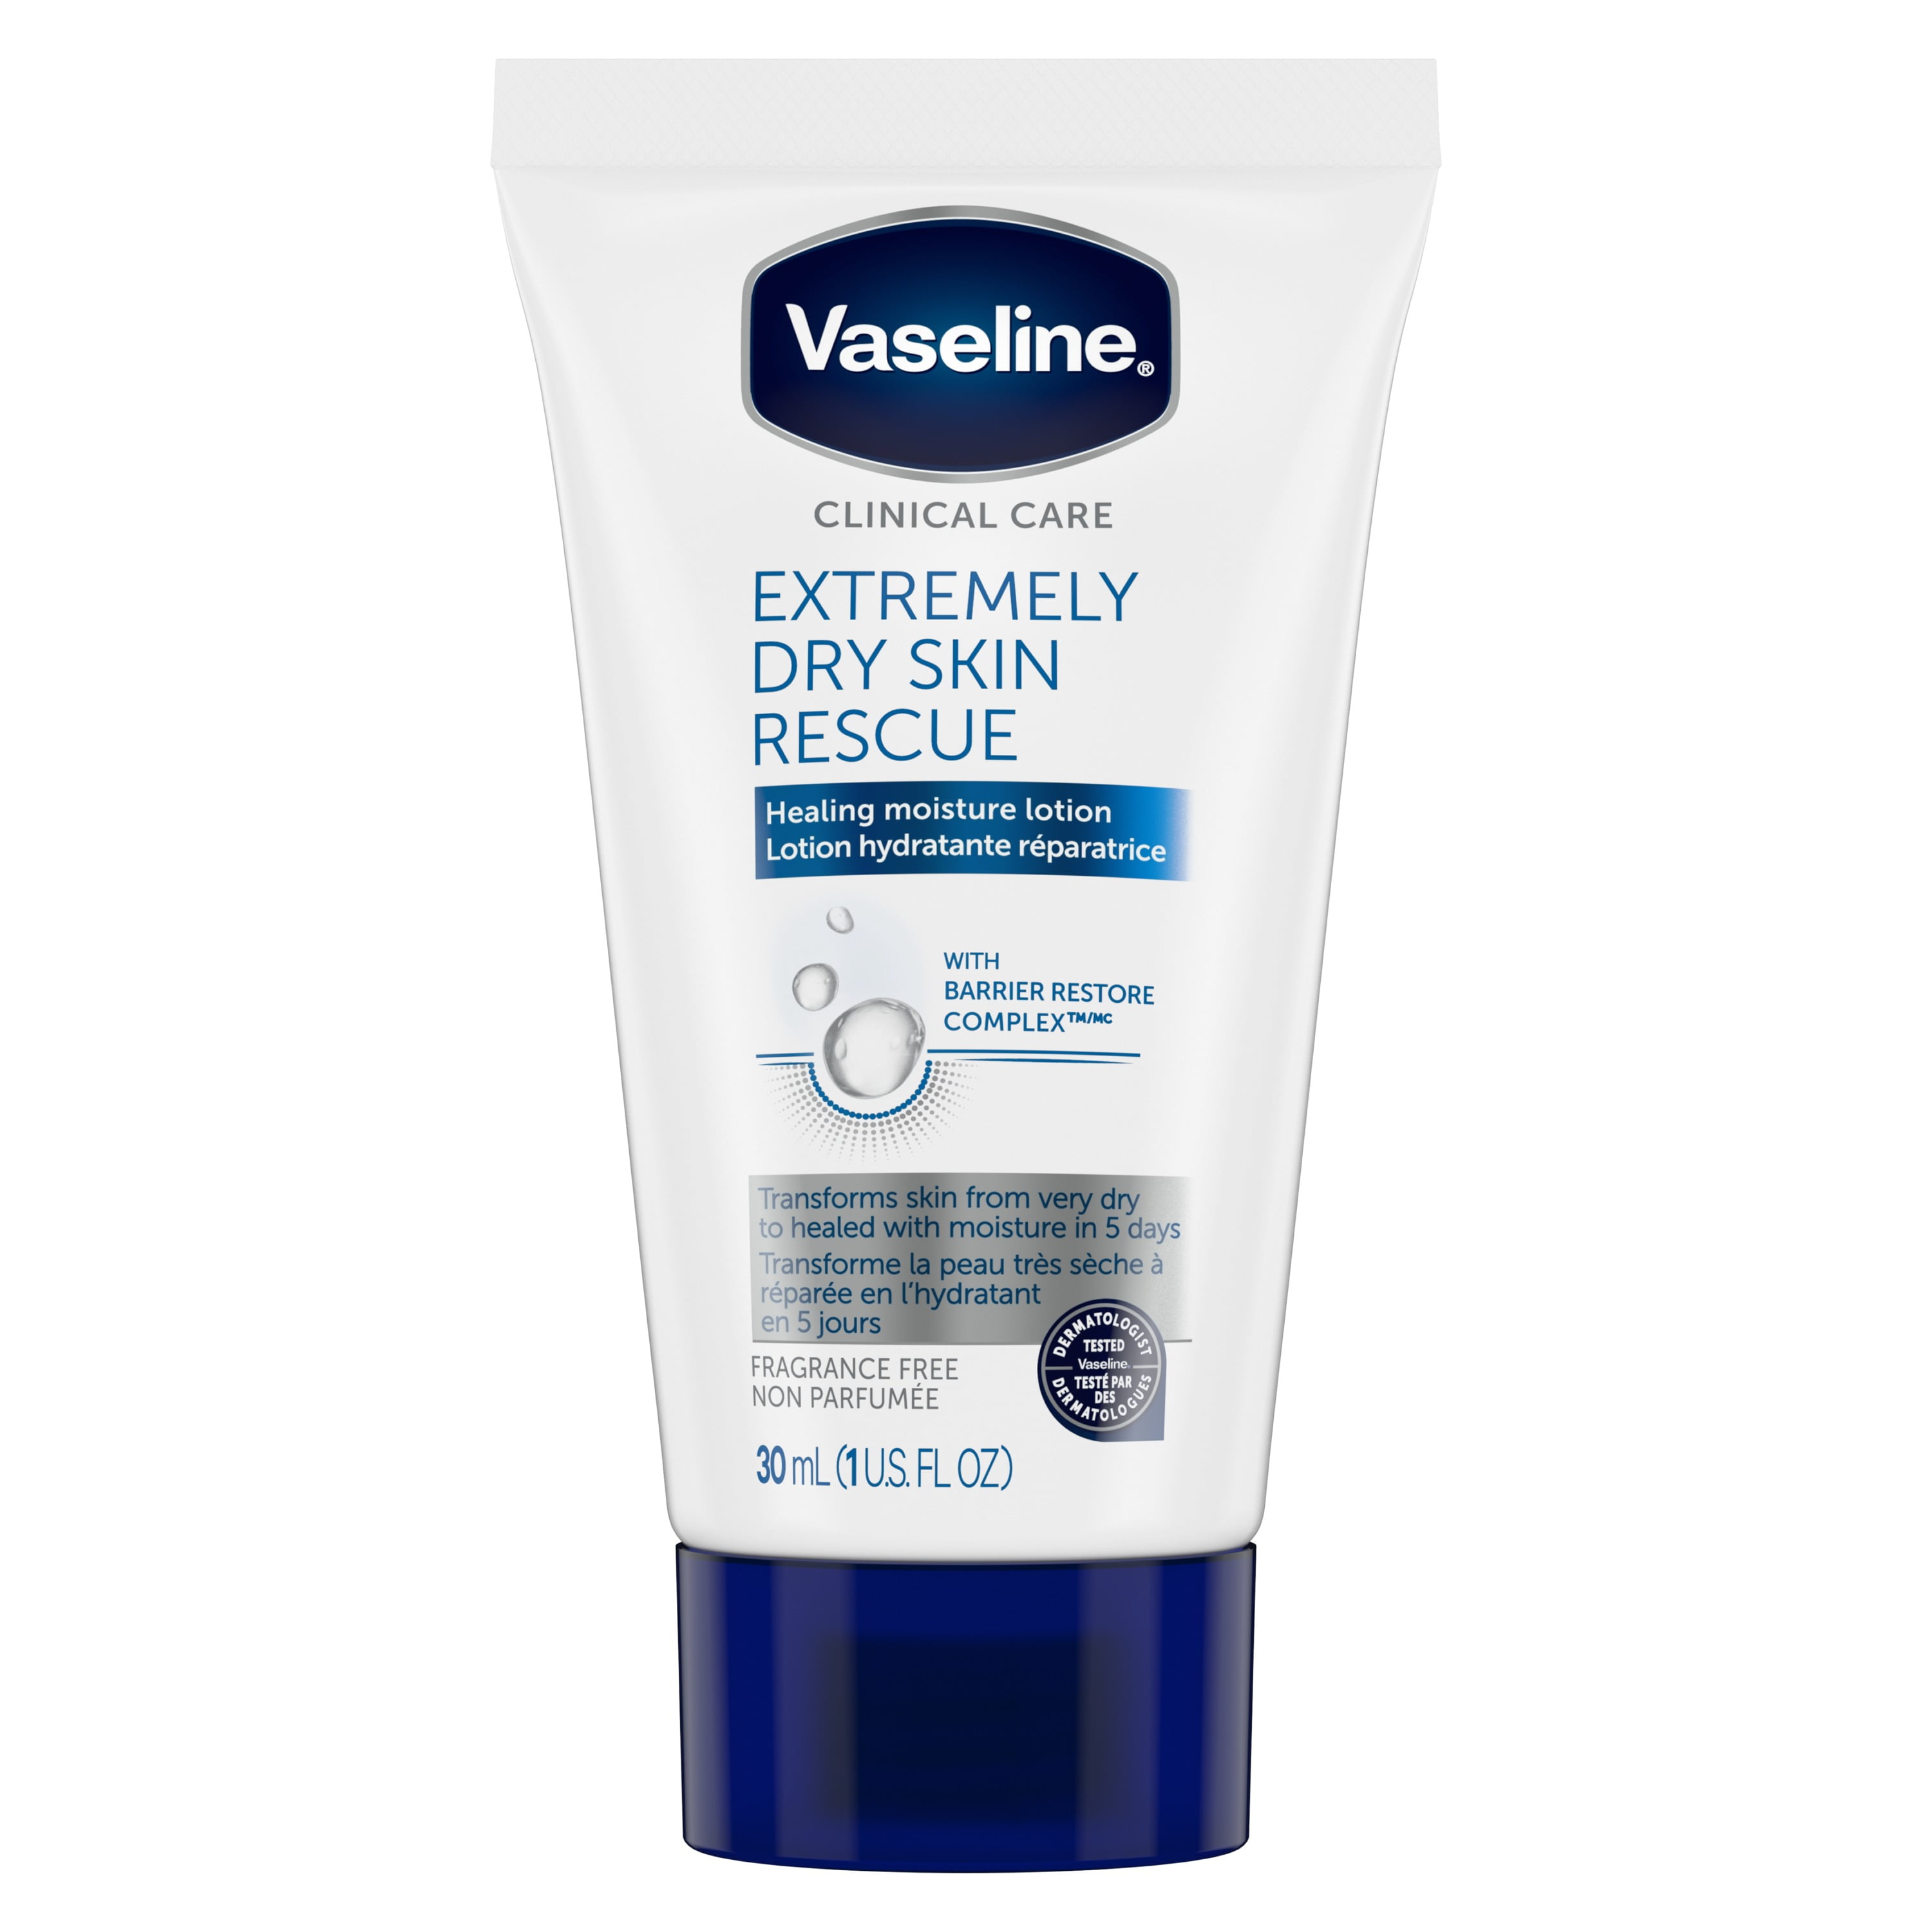 Vaseline Clinical Care Body Lotion Extremely Dry Skin Rescue 1oz